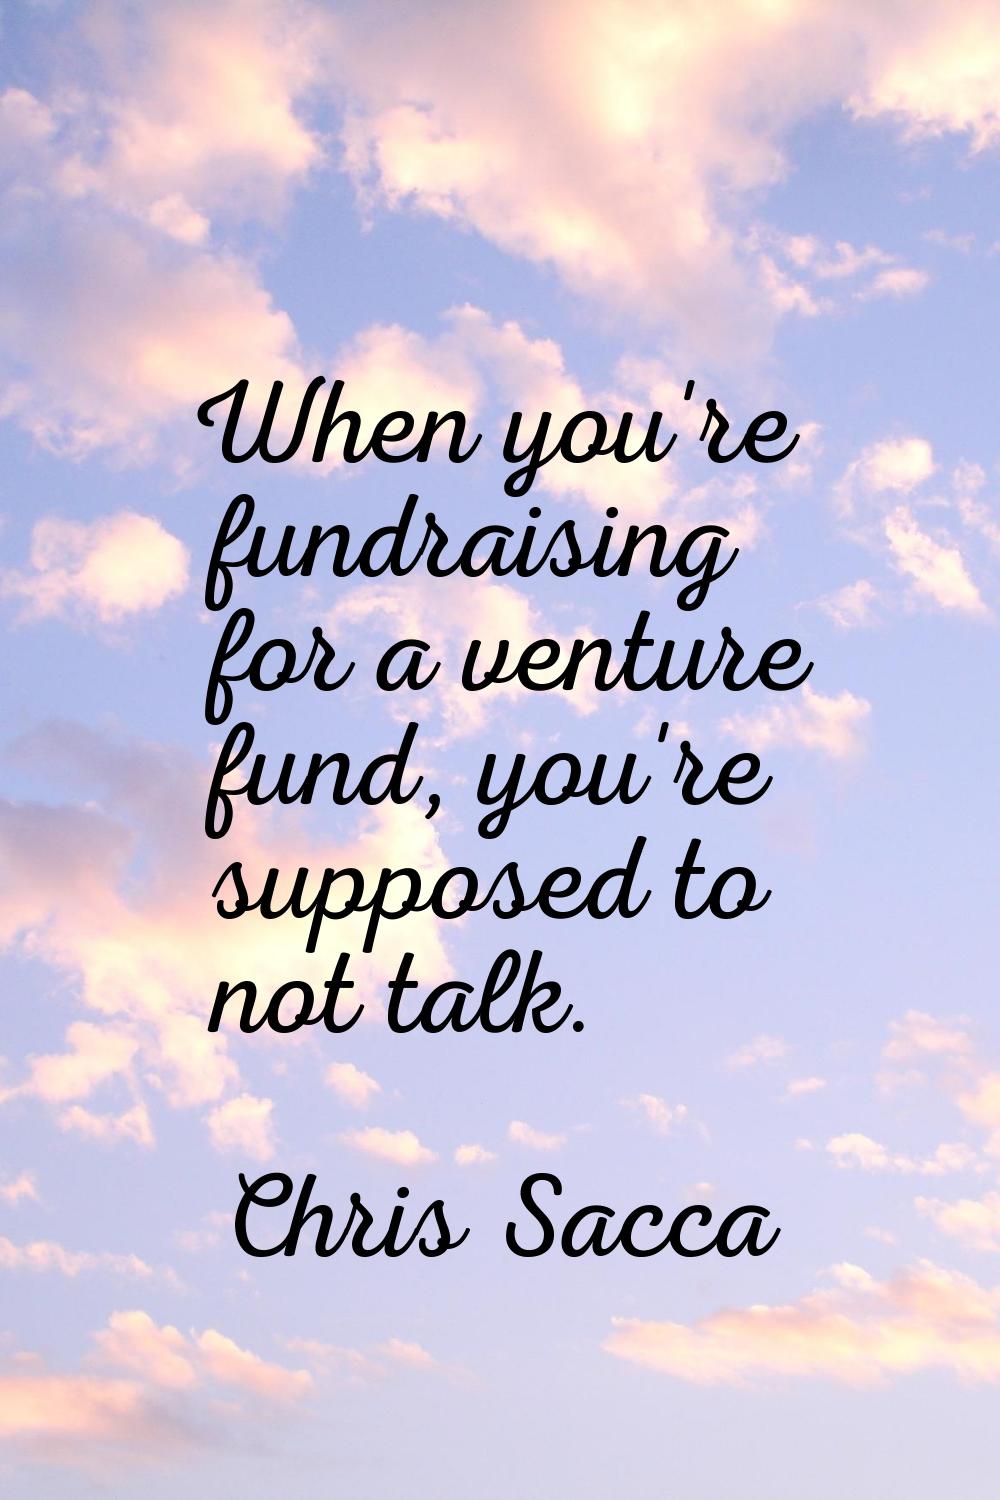 When you're fundraising for a venture fund, you're supposed to not talk.